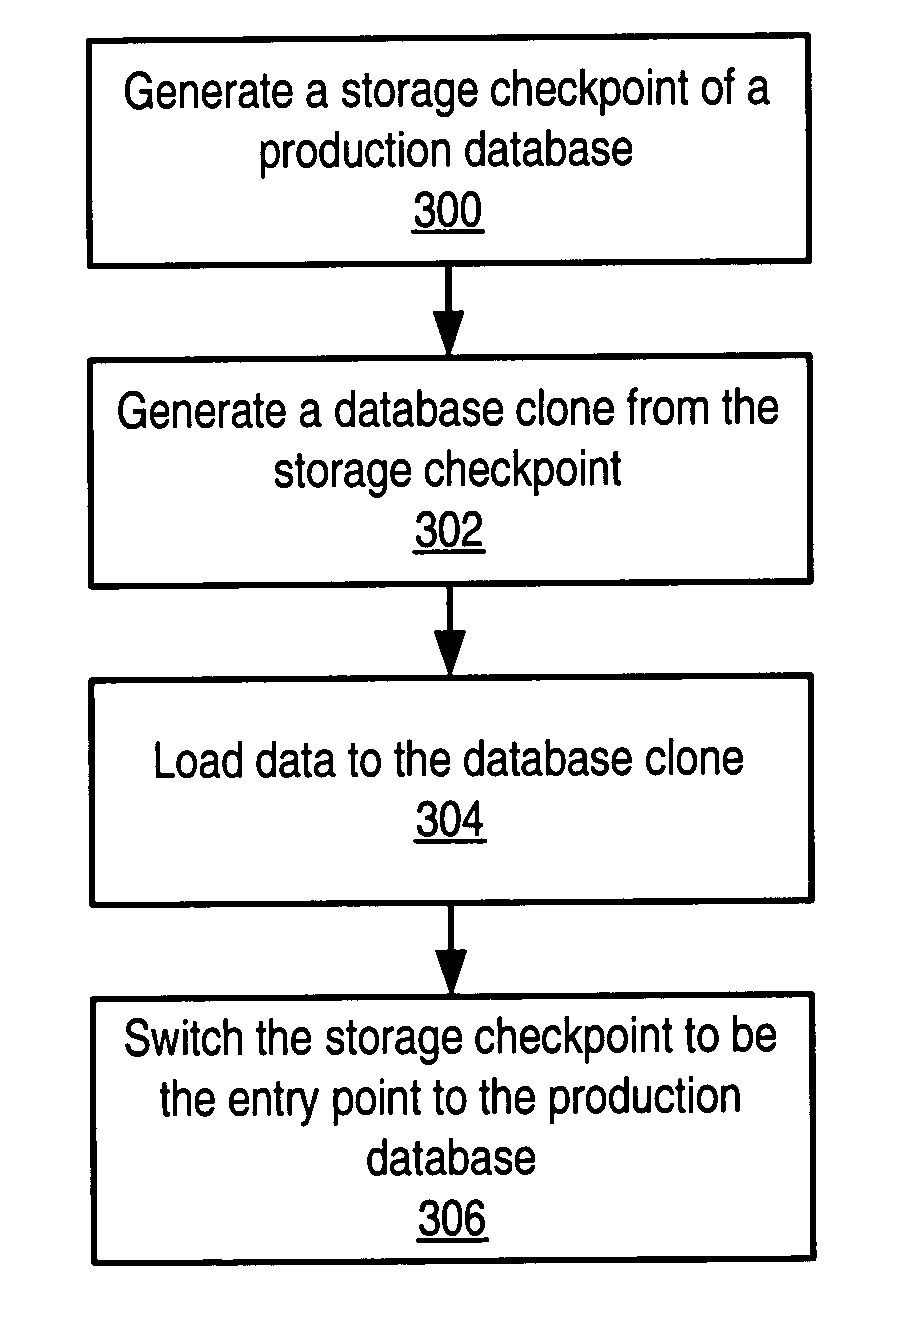 Low-impact refresh mechanism for production databases